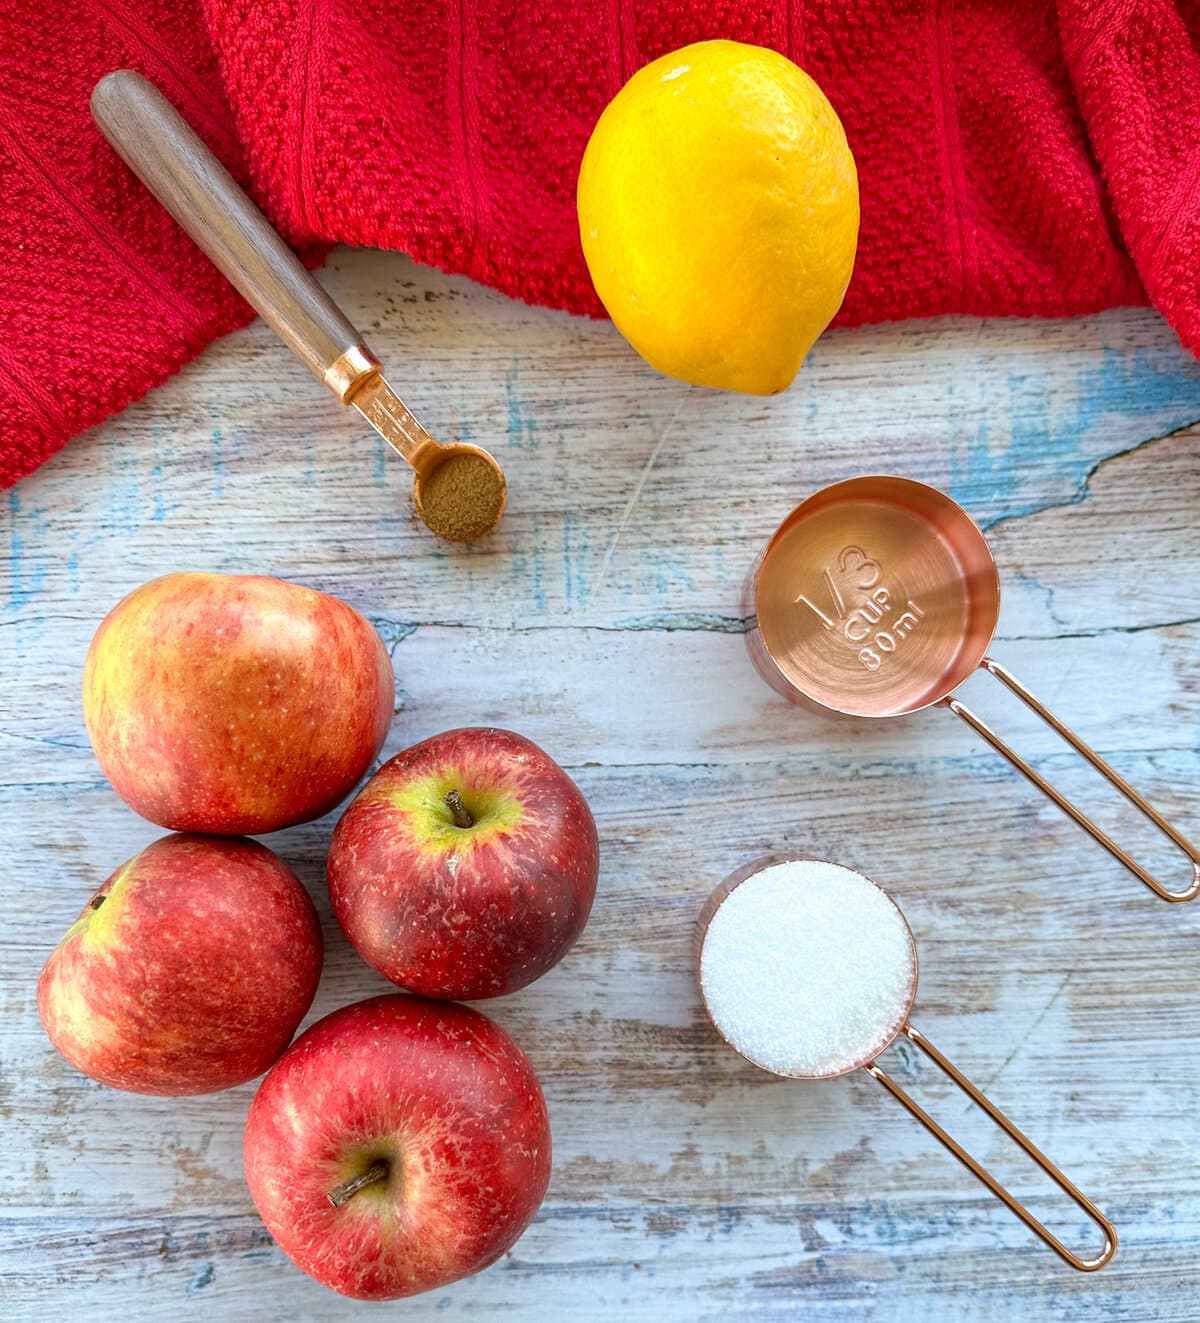 Ingredients required to make stewed apples or apple compote